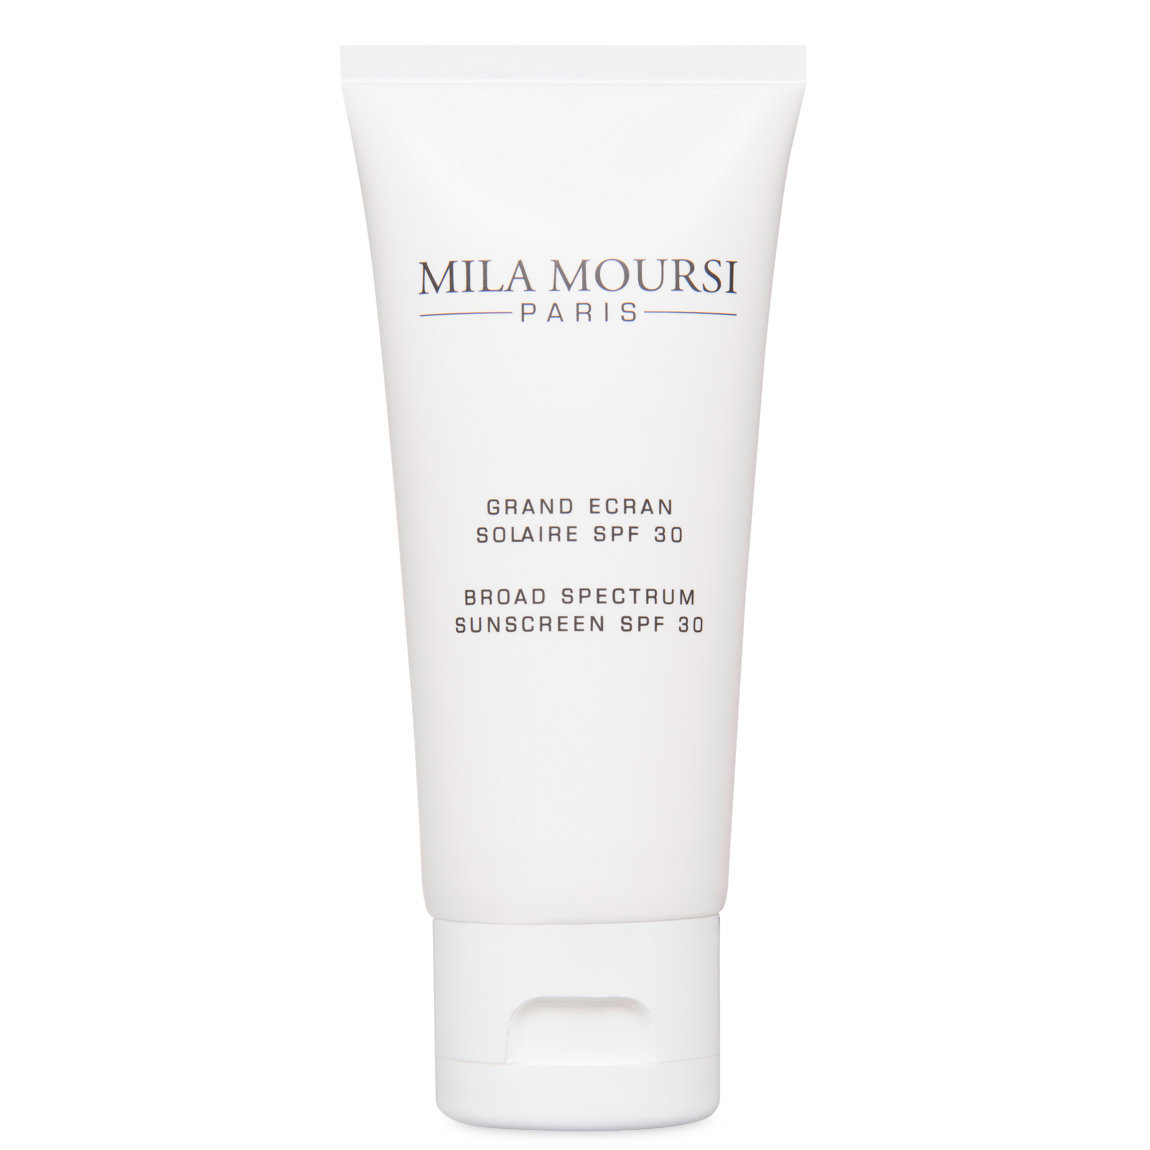 Mila Moursi Broad Spectrum Sunscreen SPF 30 alternative view 1 - product swatch.